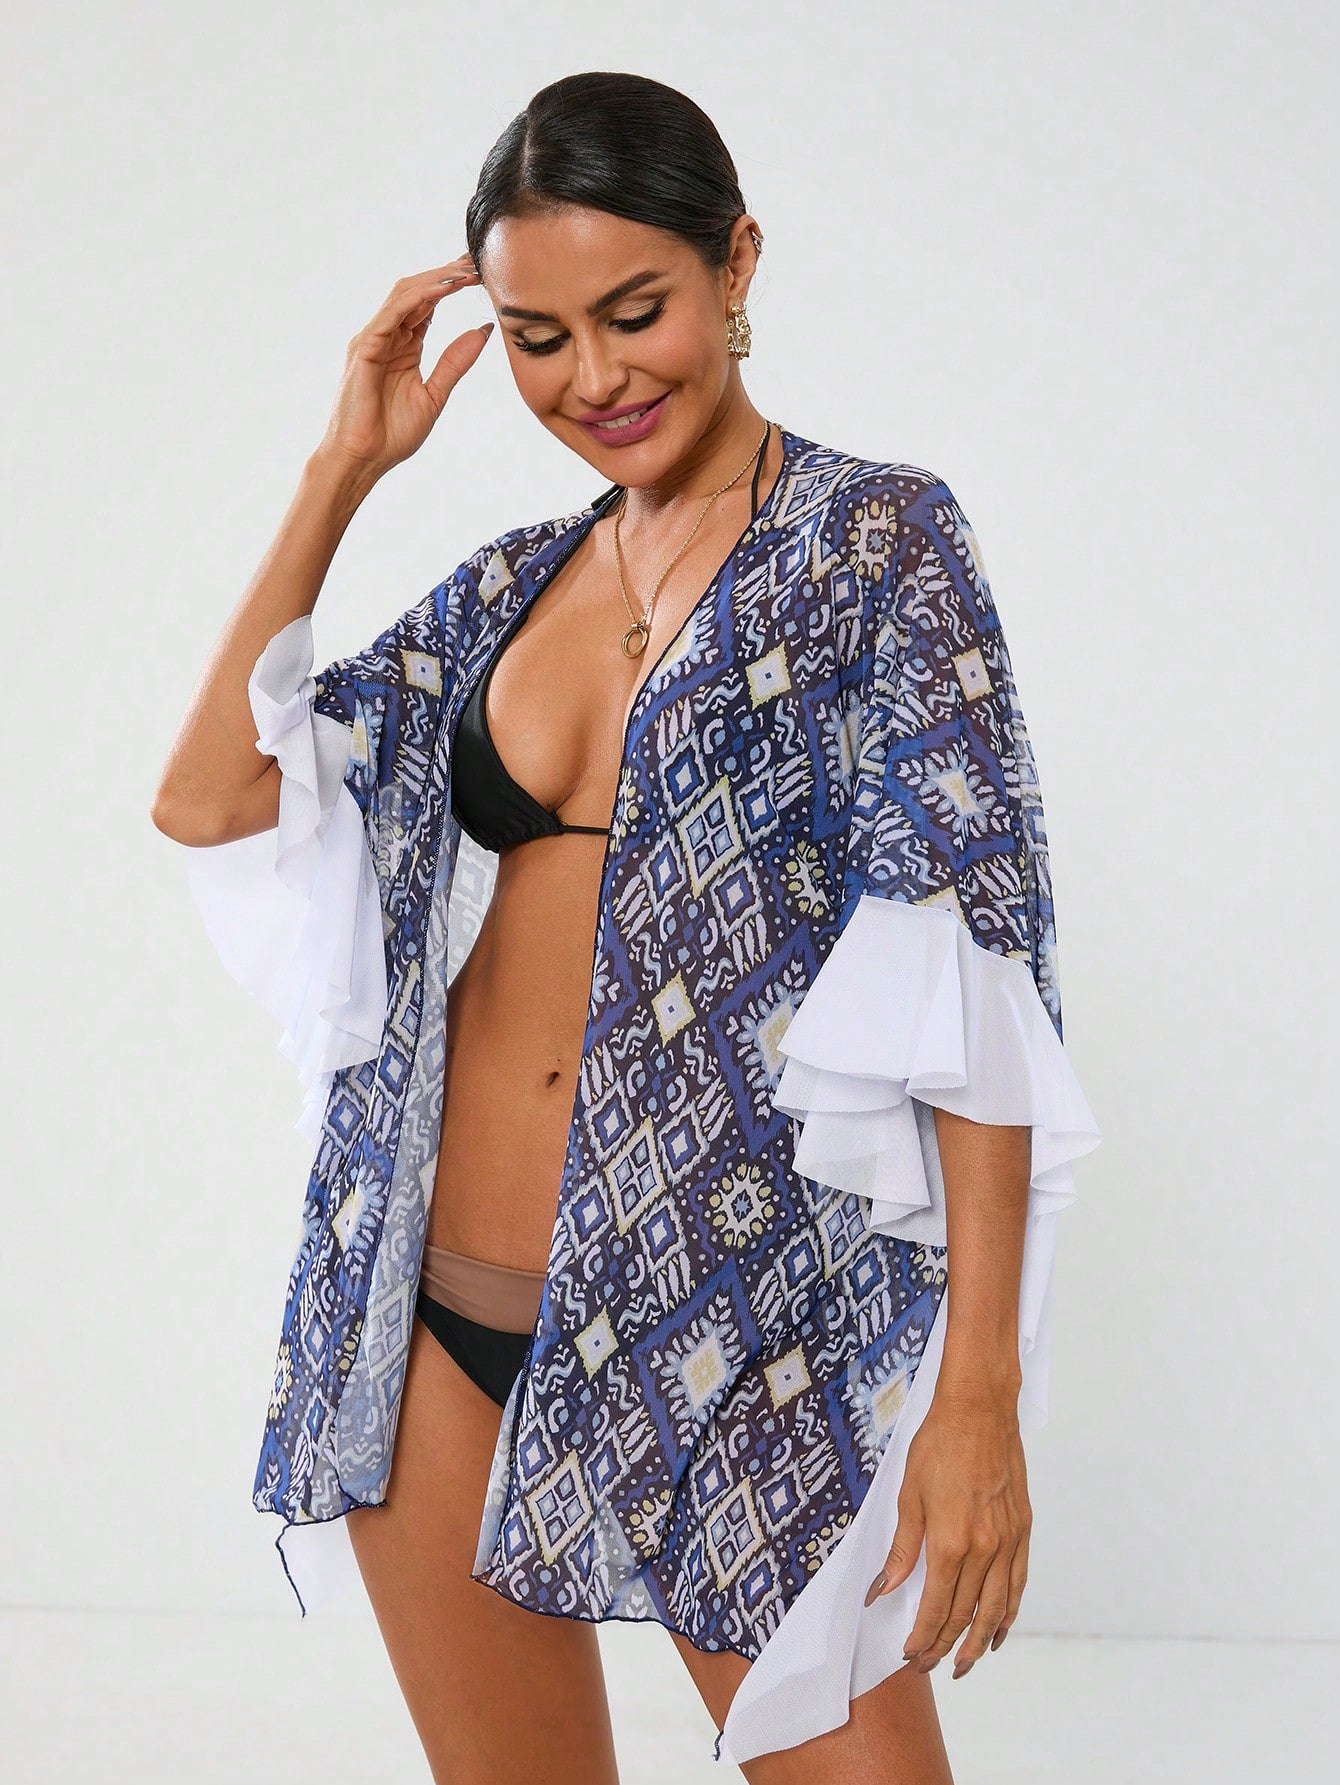 Women's Geometric Pattern Open Front Cover Up